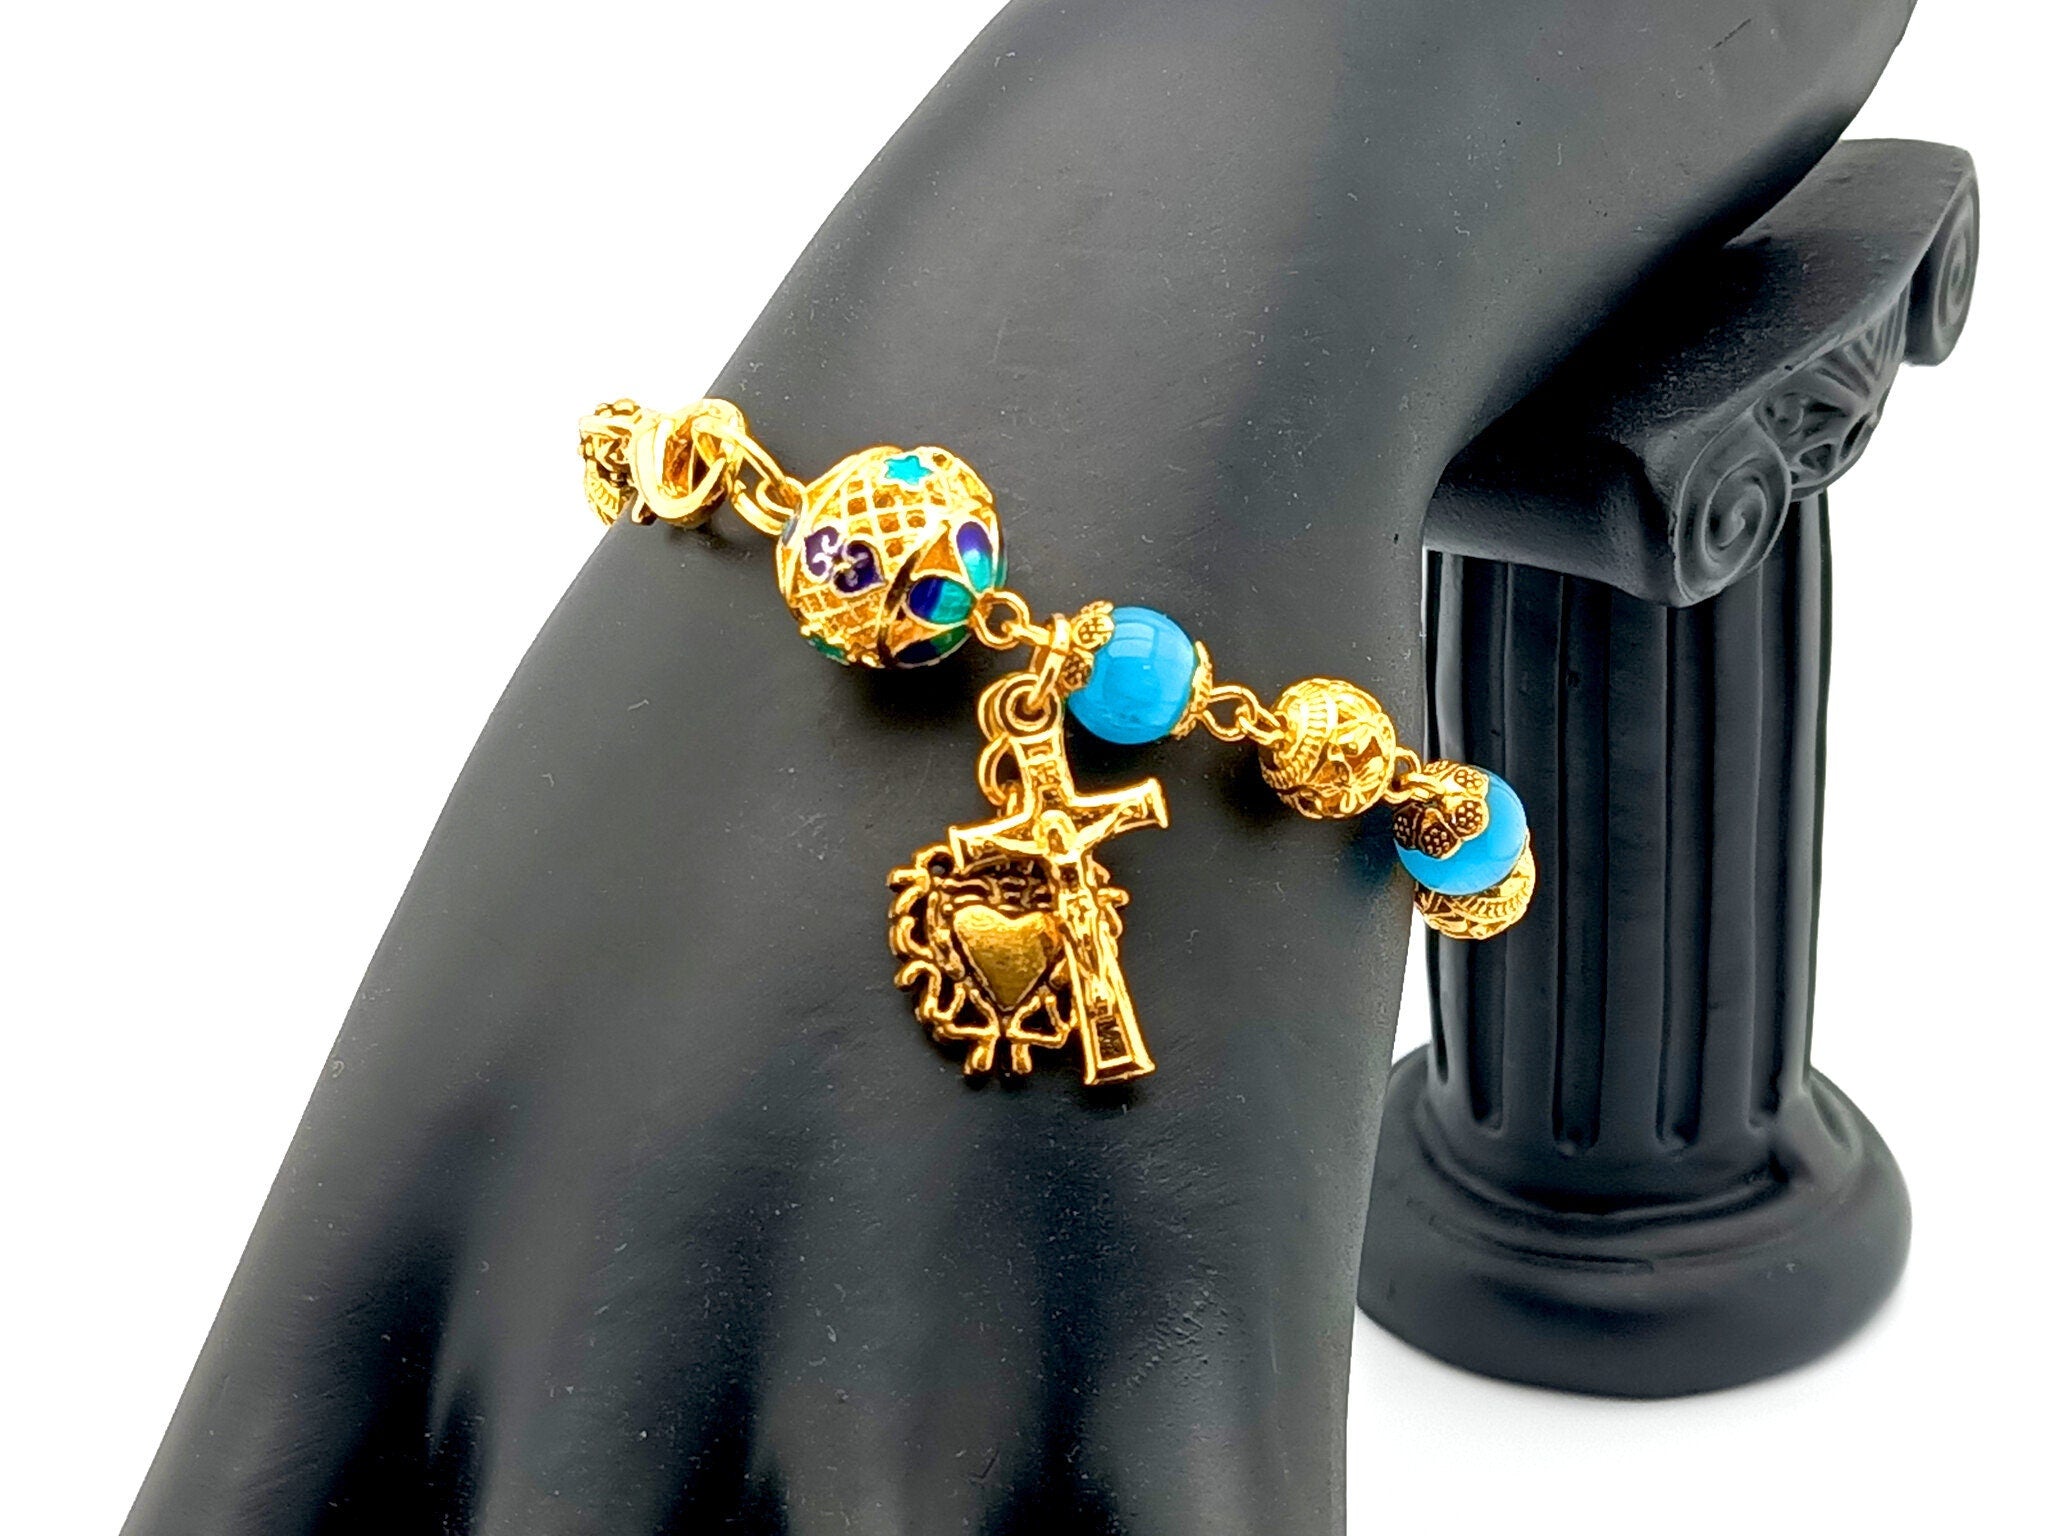 Gold and Blue unique rosary beads single decade rosary bracelet with blue glass and golden beads, golden crucifix and Sacred Heart medal.